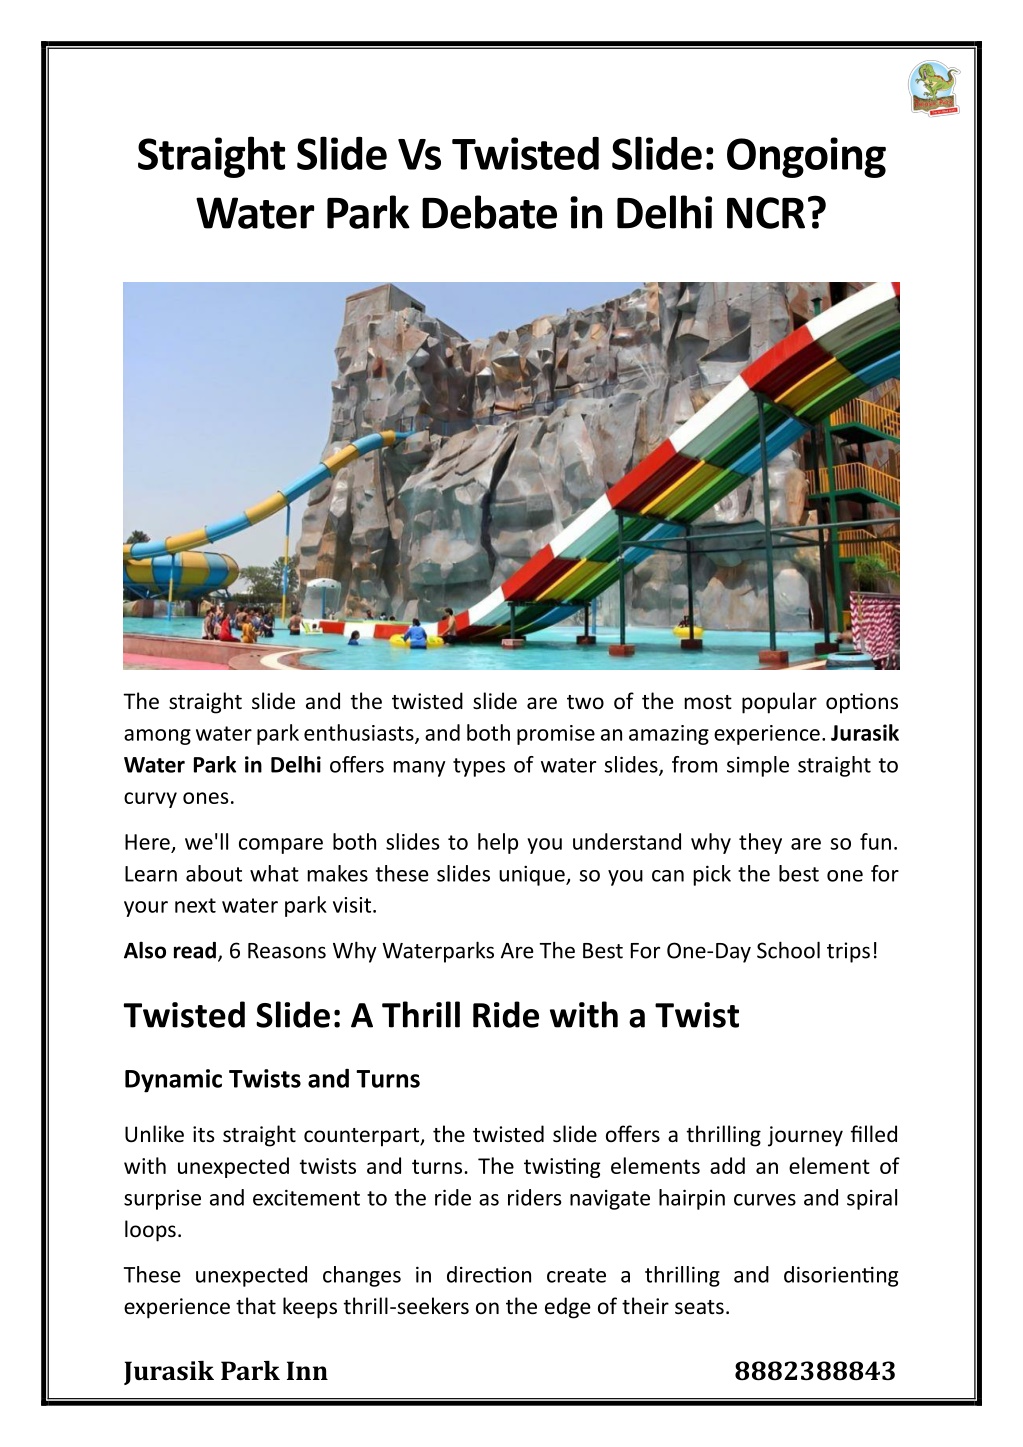 PPT - Straight Slide Vs Twisted Slide: Ongoing Water Park Debate In ...